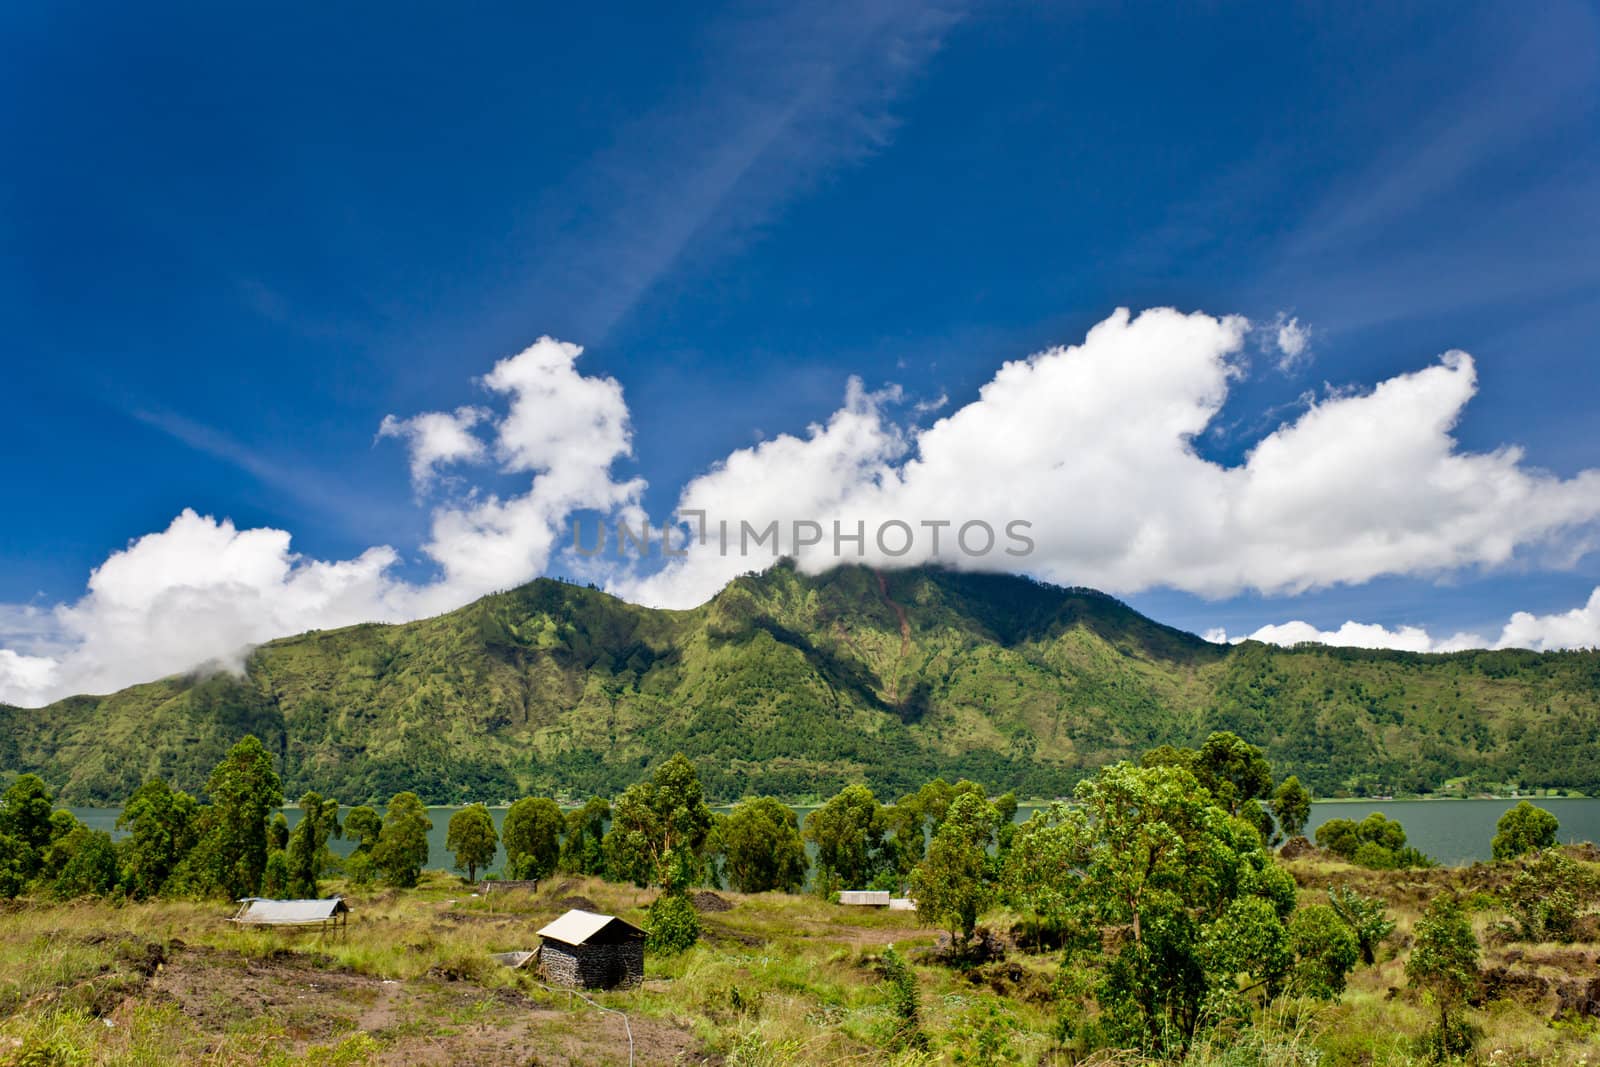 Bali landscape wit two small rural huts in a lush green valley with a mountain backkdrop under a cloudy blue sky and sunshine